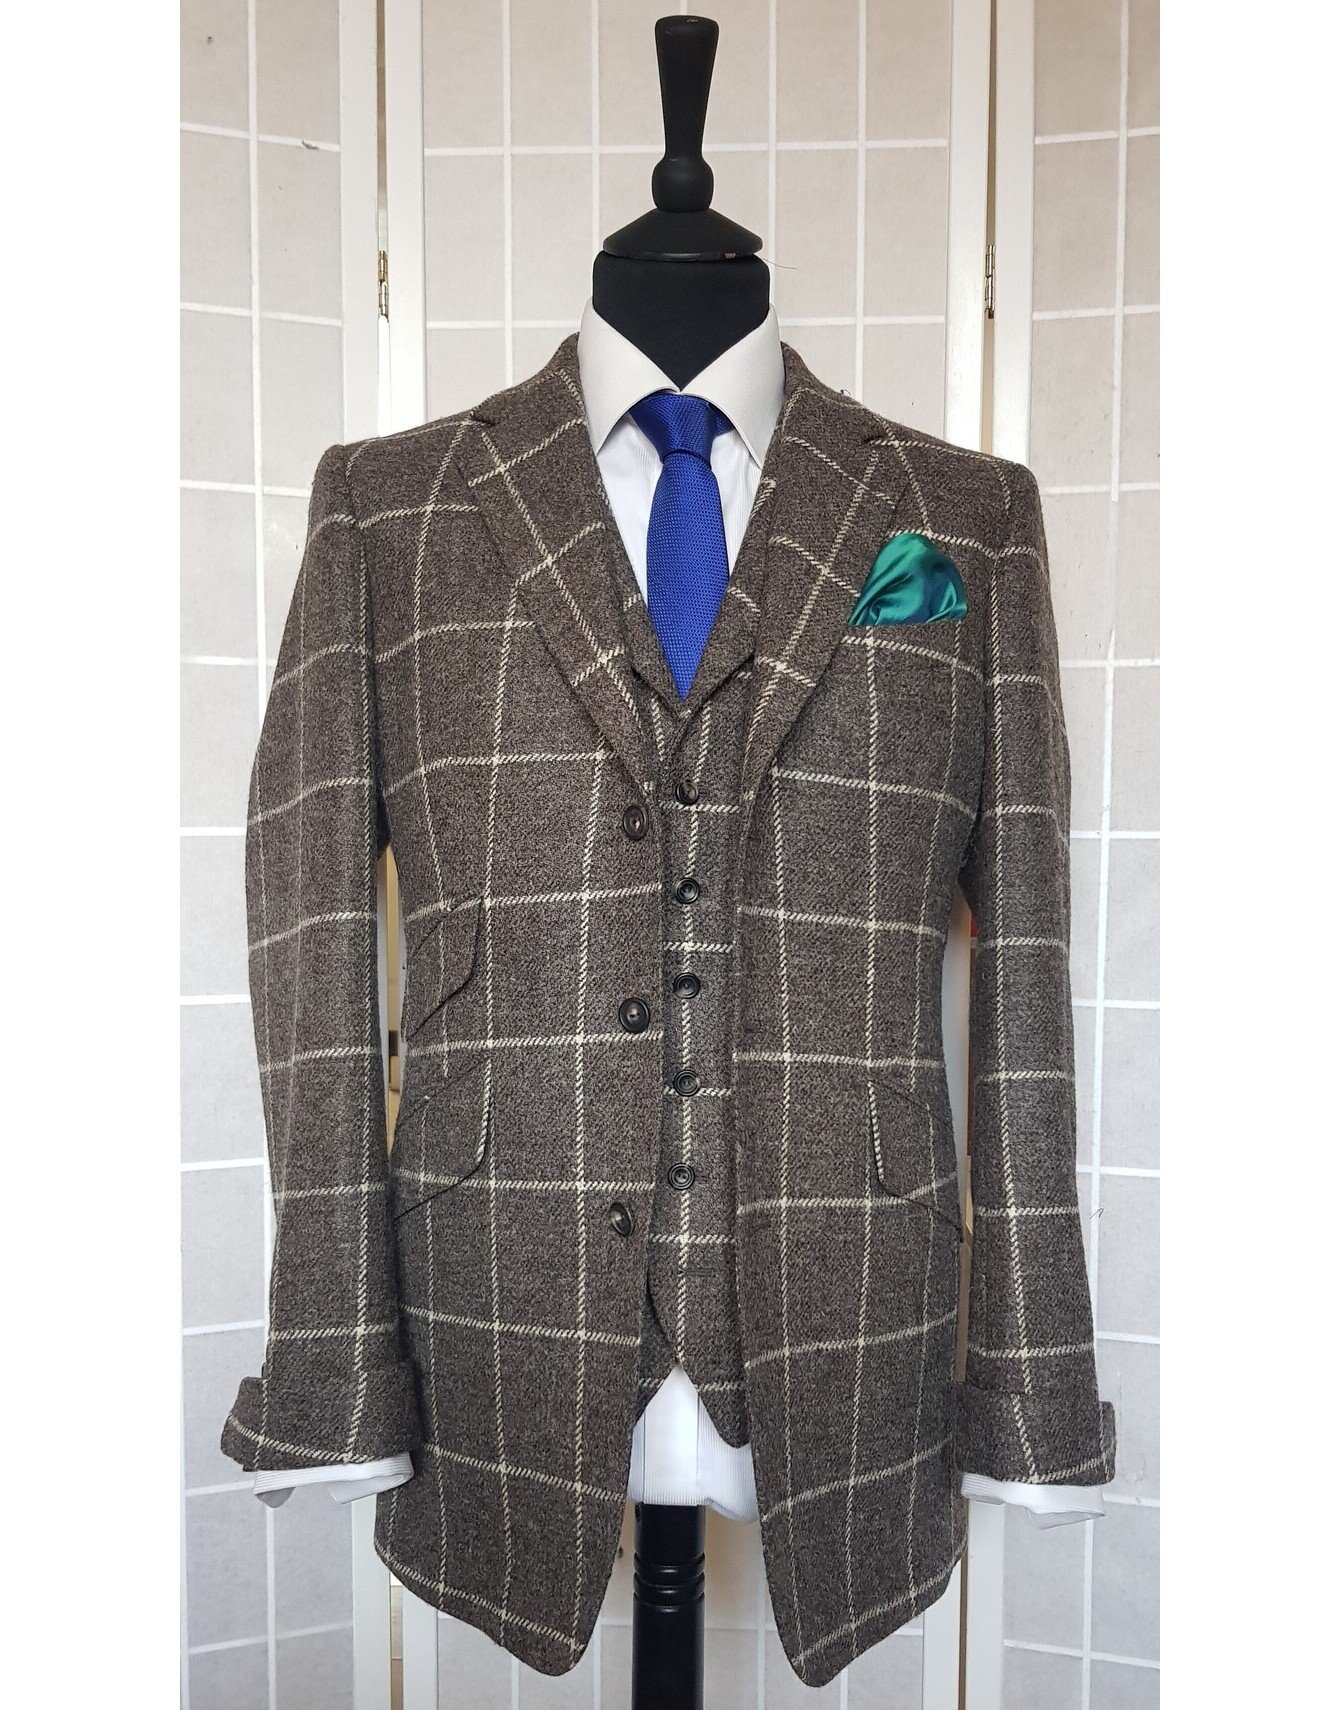 Ready to wear tweed jackets, waistcoats and trousers available now ...